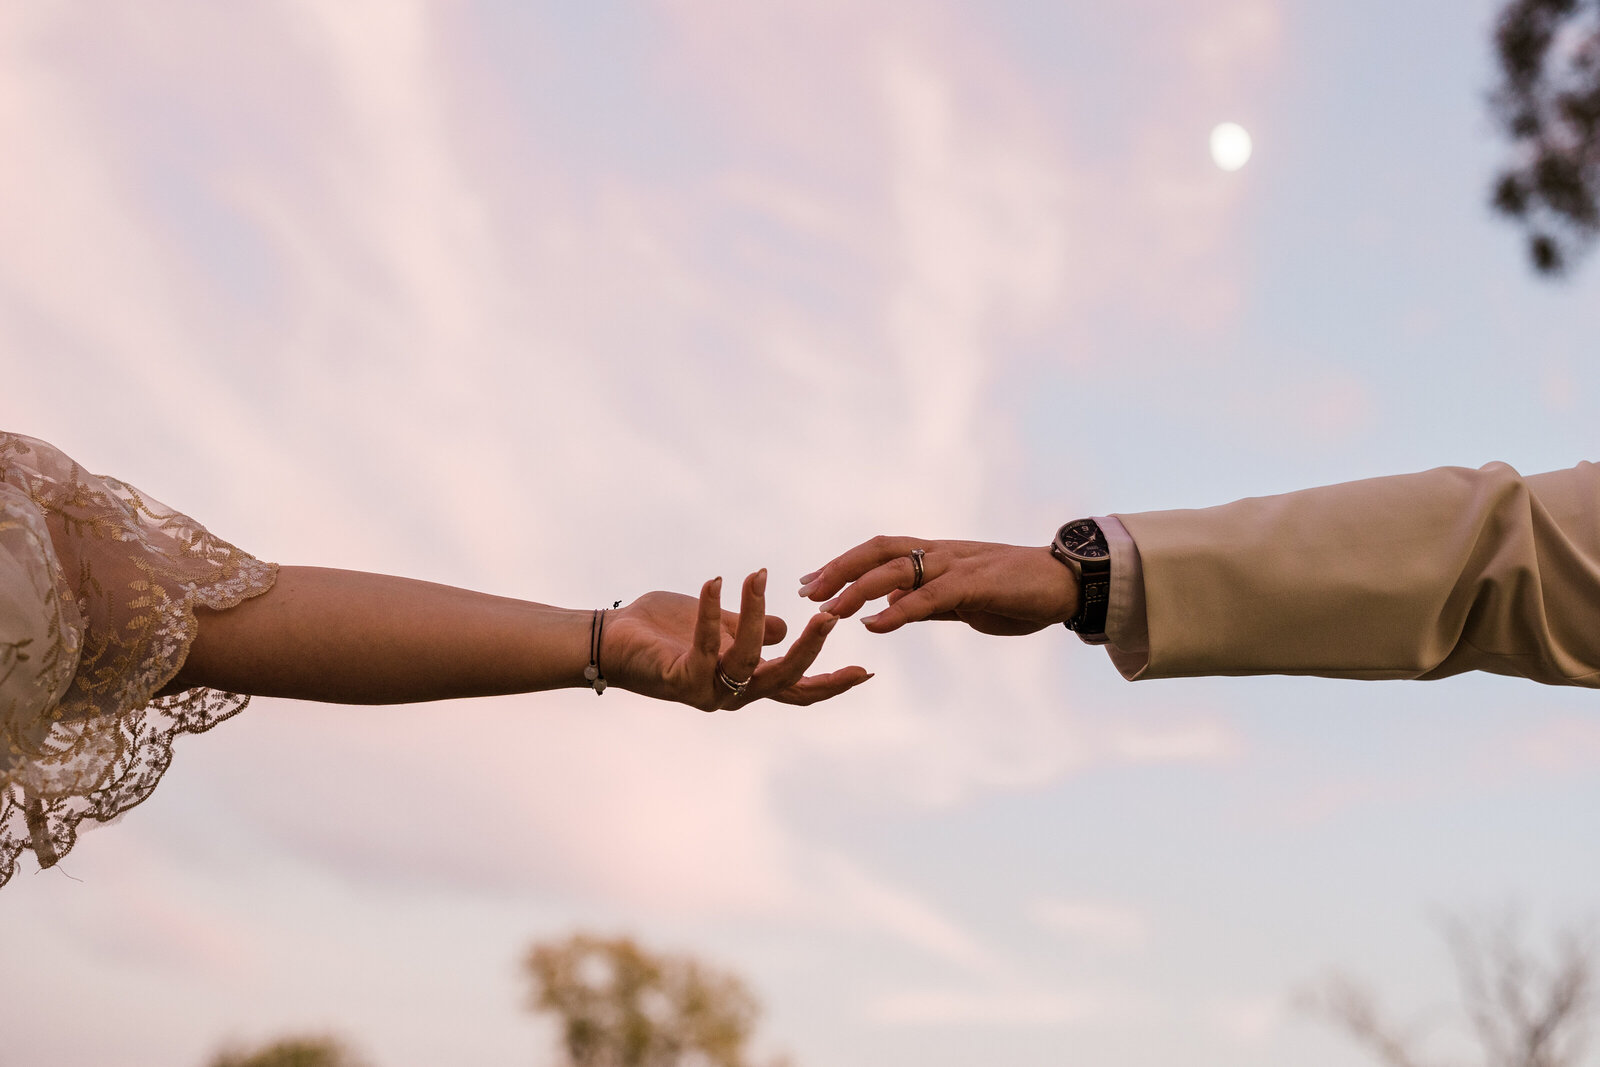 A creative wedding photo featuring two brides' hands reaching towards each other. The sunset sky is behind their hands, and it's pink and also features the moon.